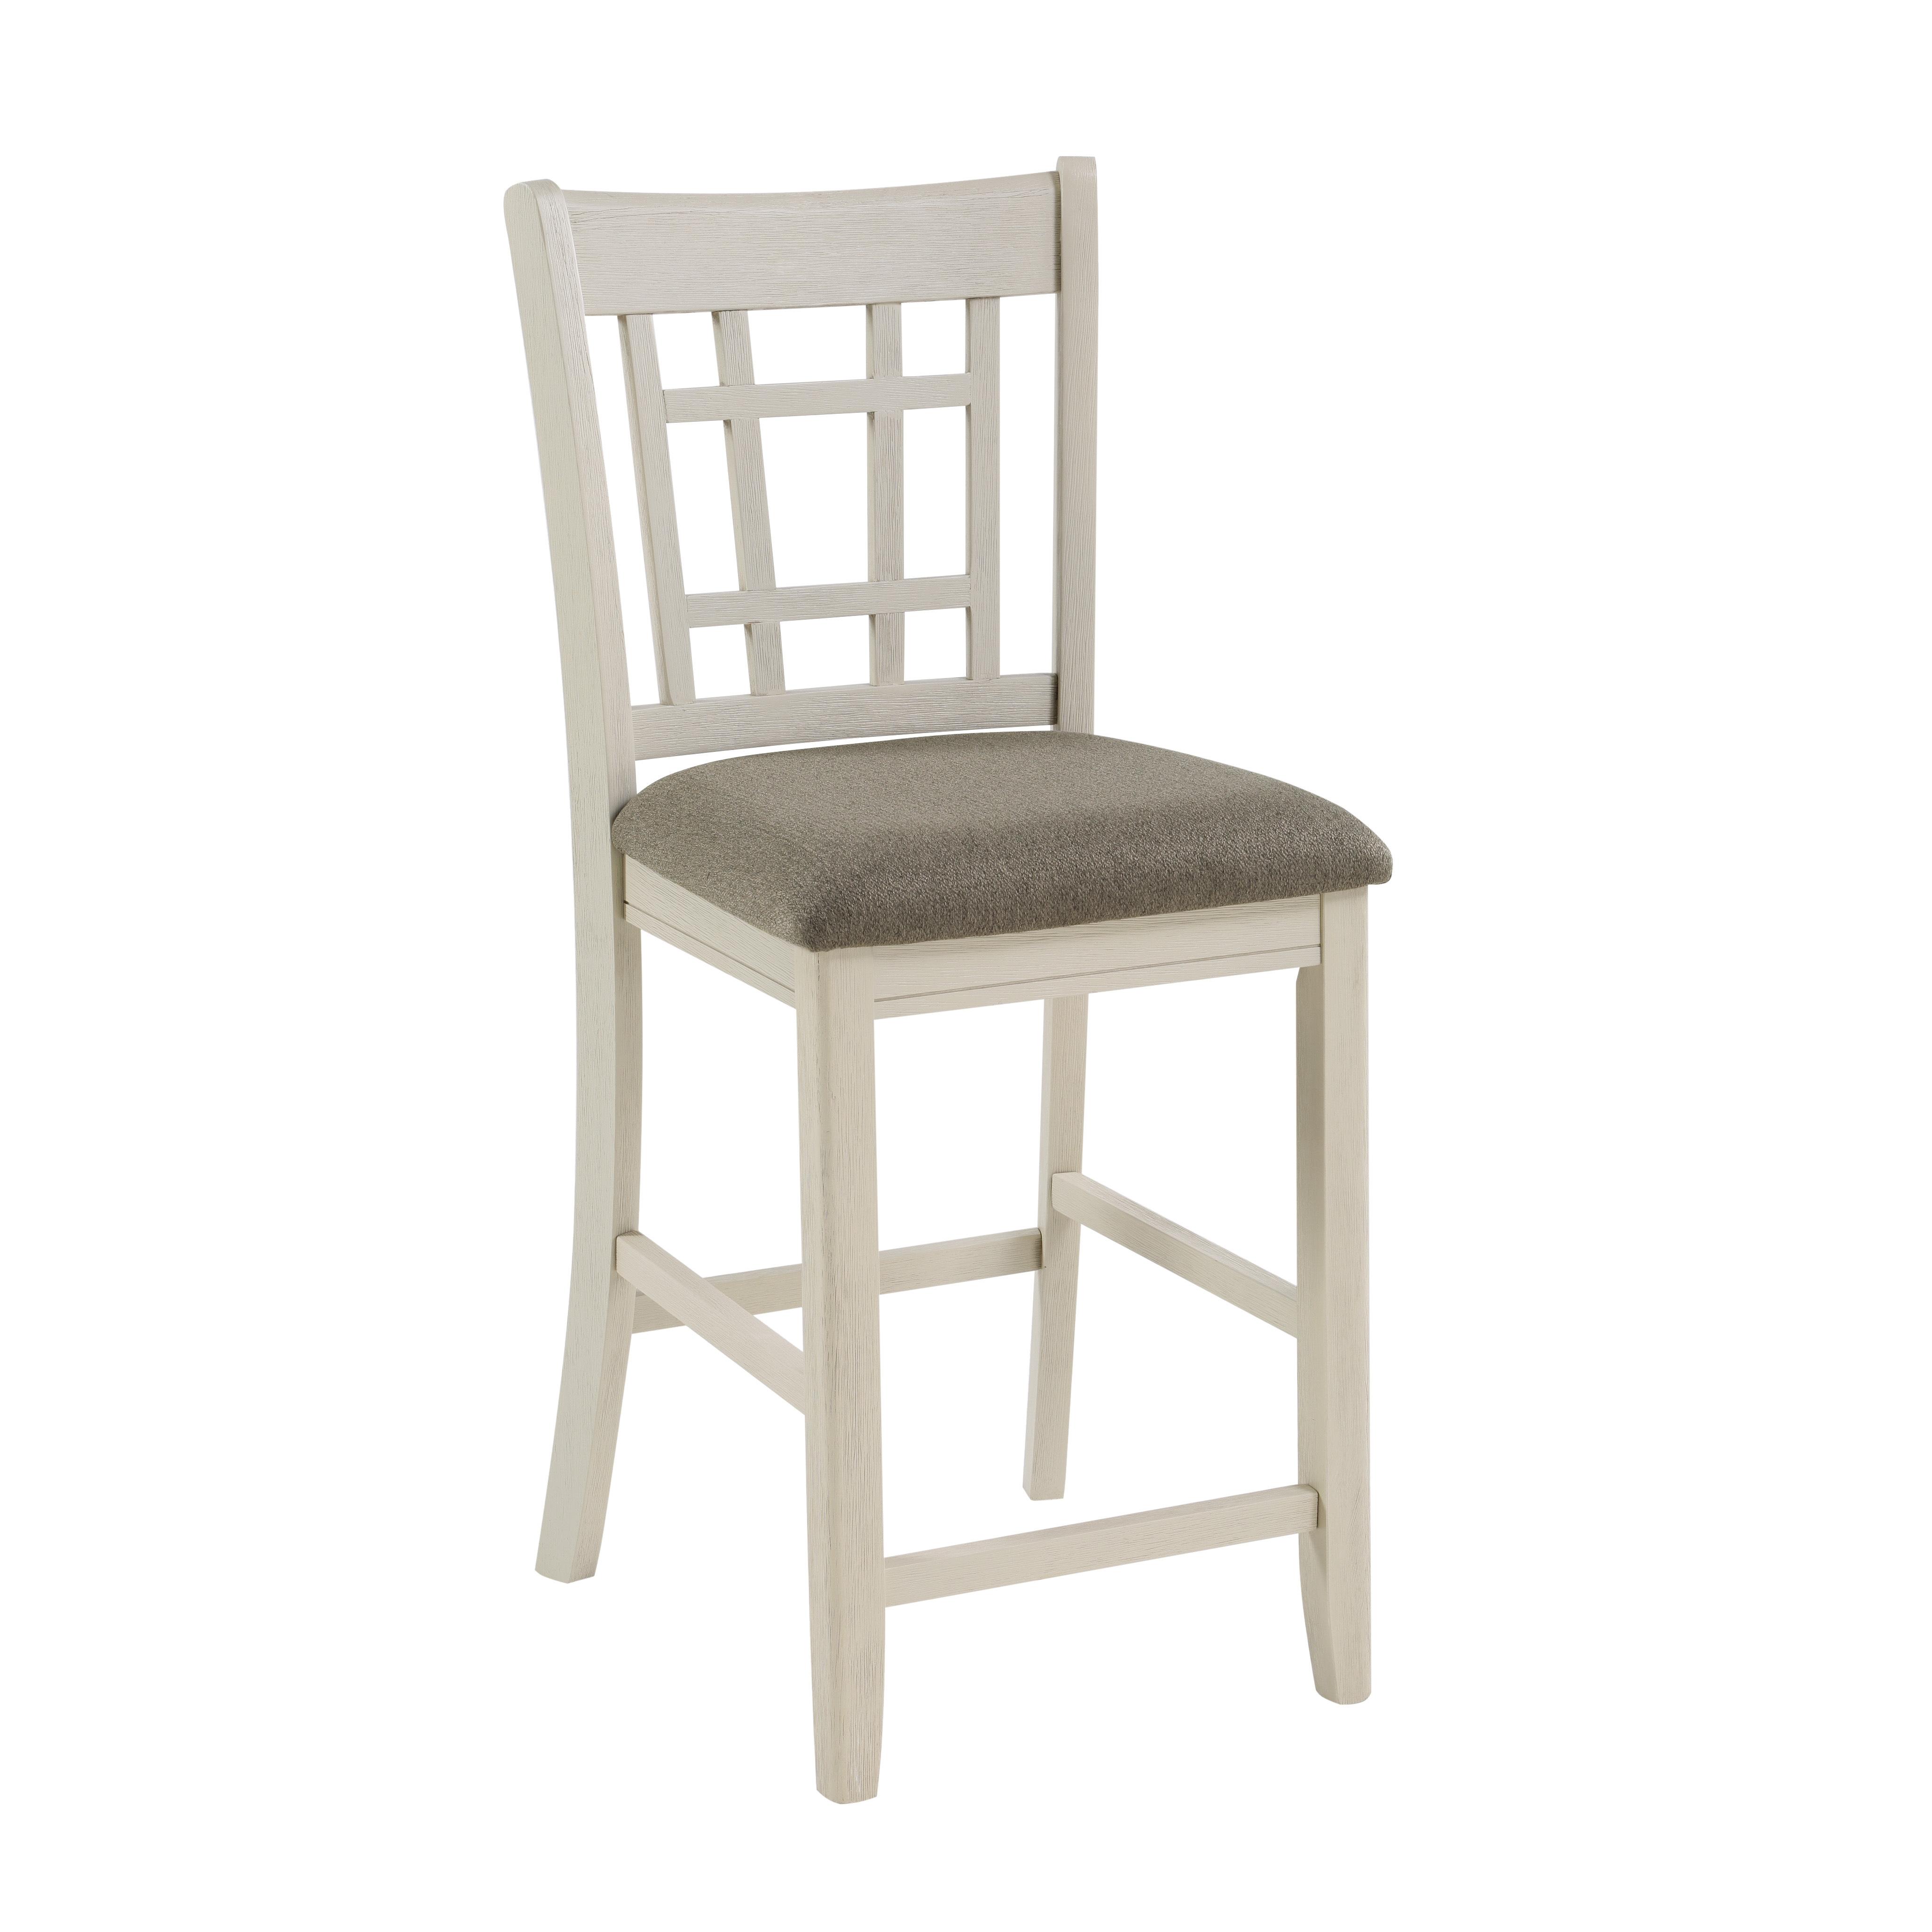 Traditional Counter Height Chair 2423W-24 Junipero 2423W-24 in Antique White Polyester